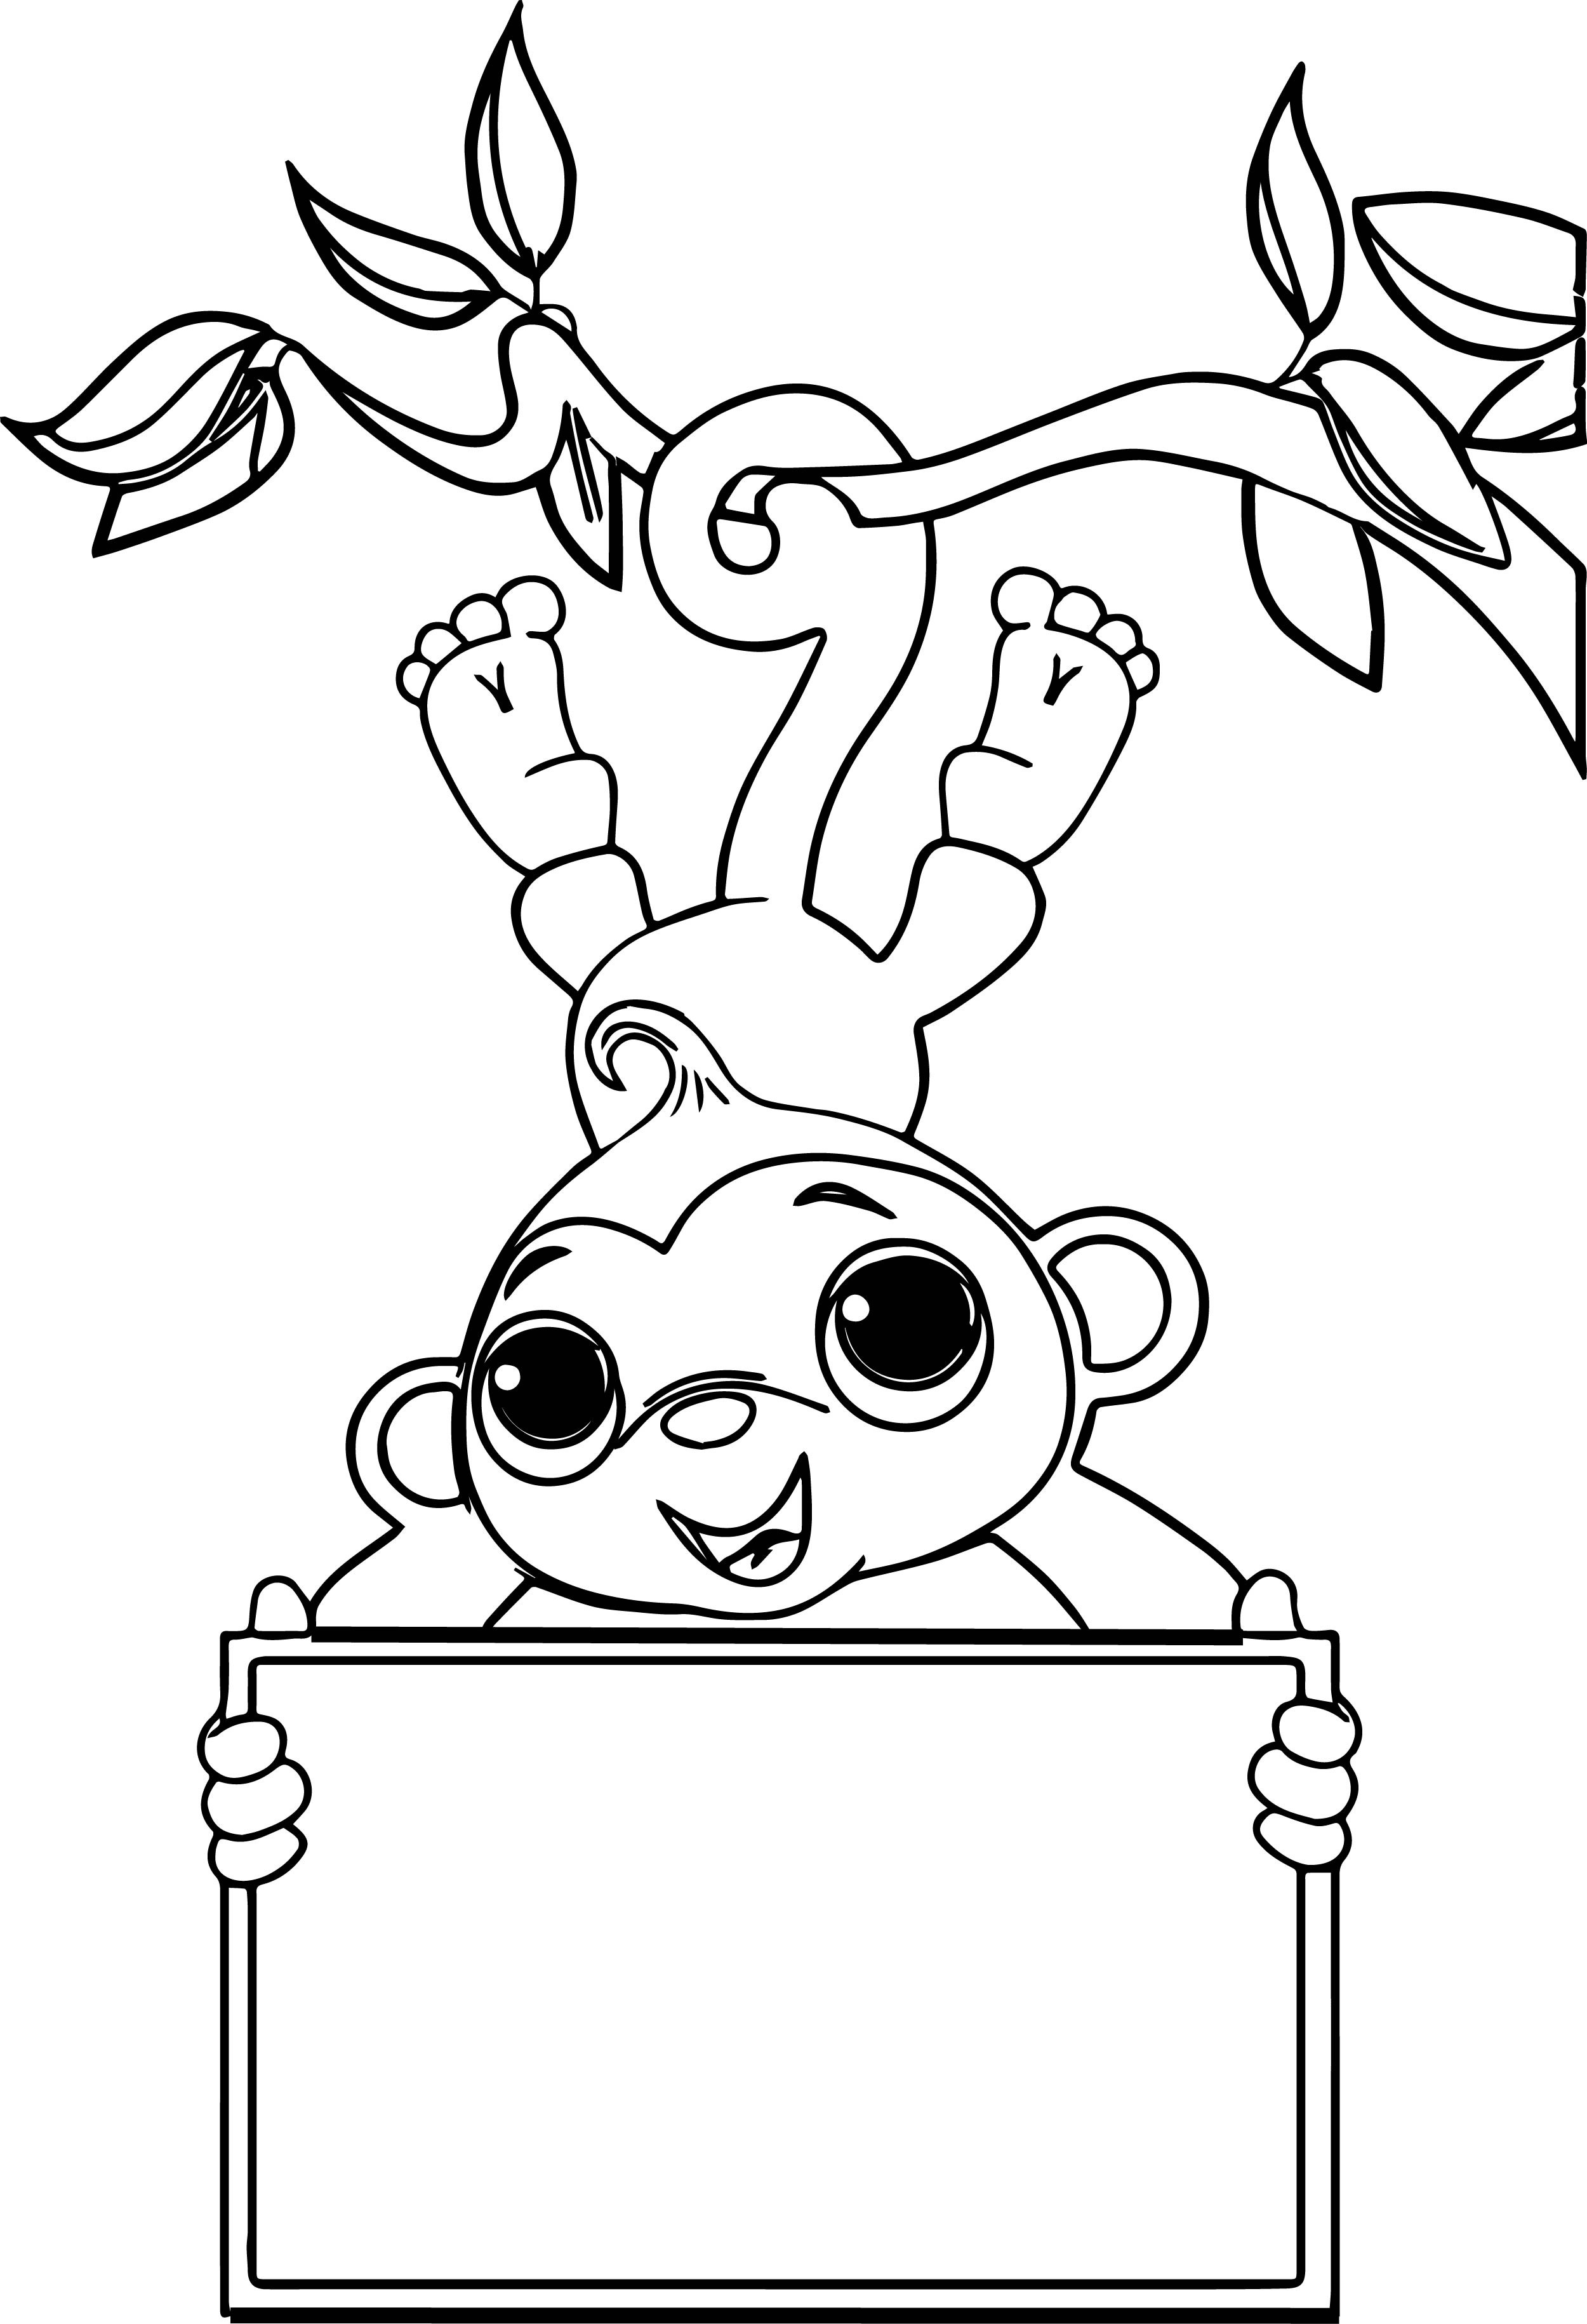 Coloring Pages Of Cute Baby Monkeys at GetColorings.com | Free